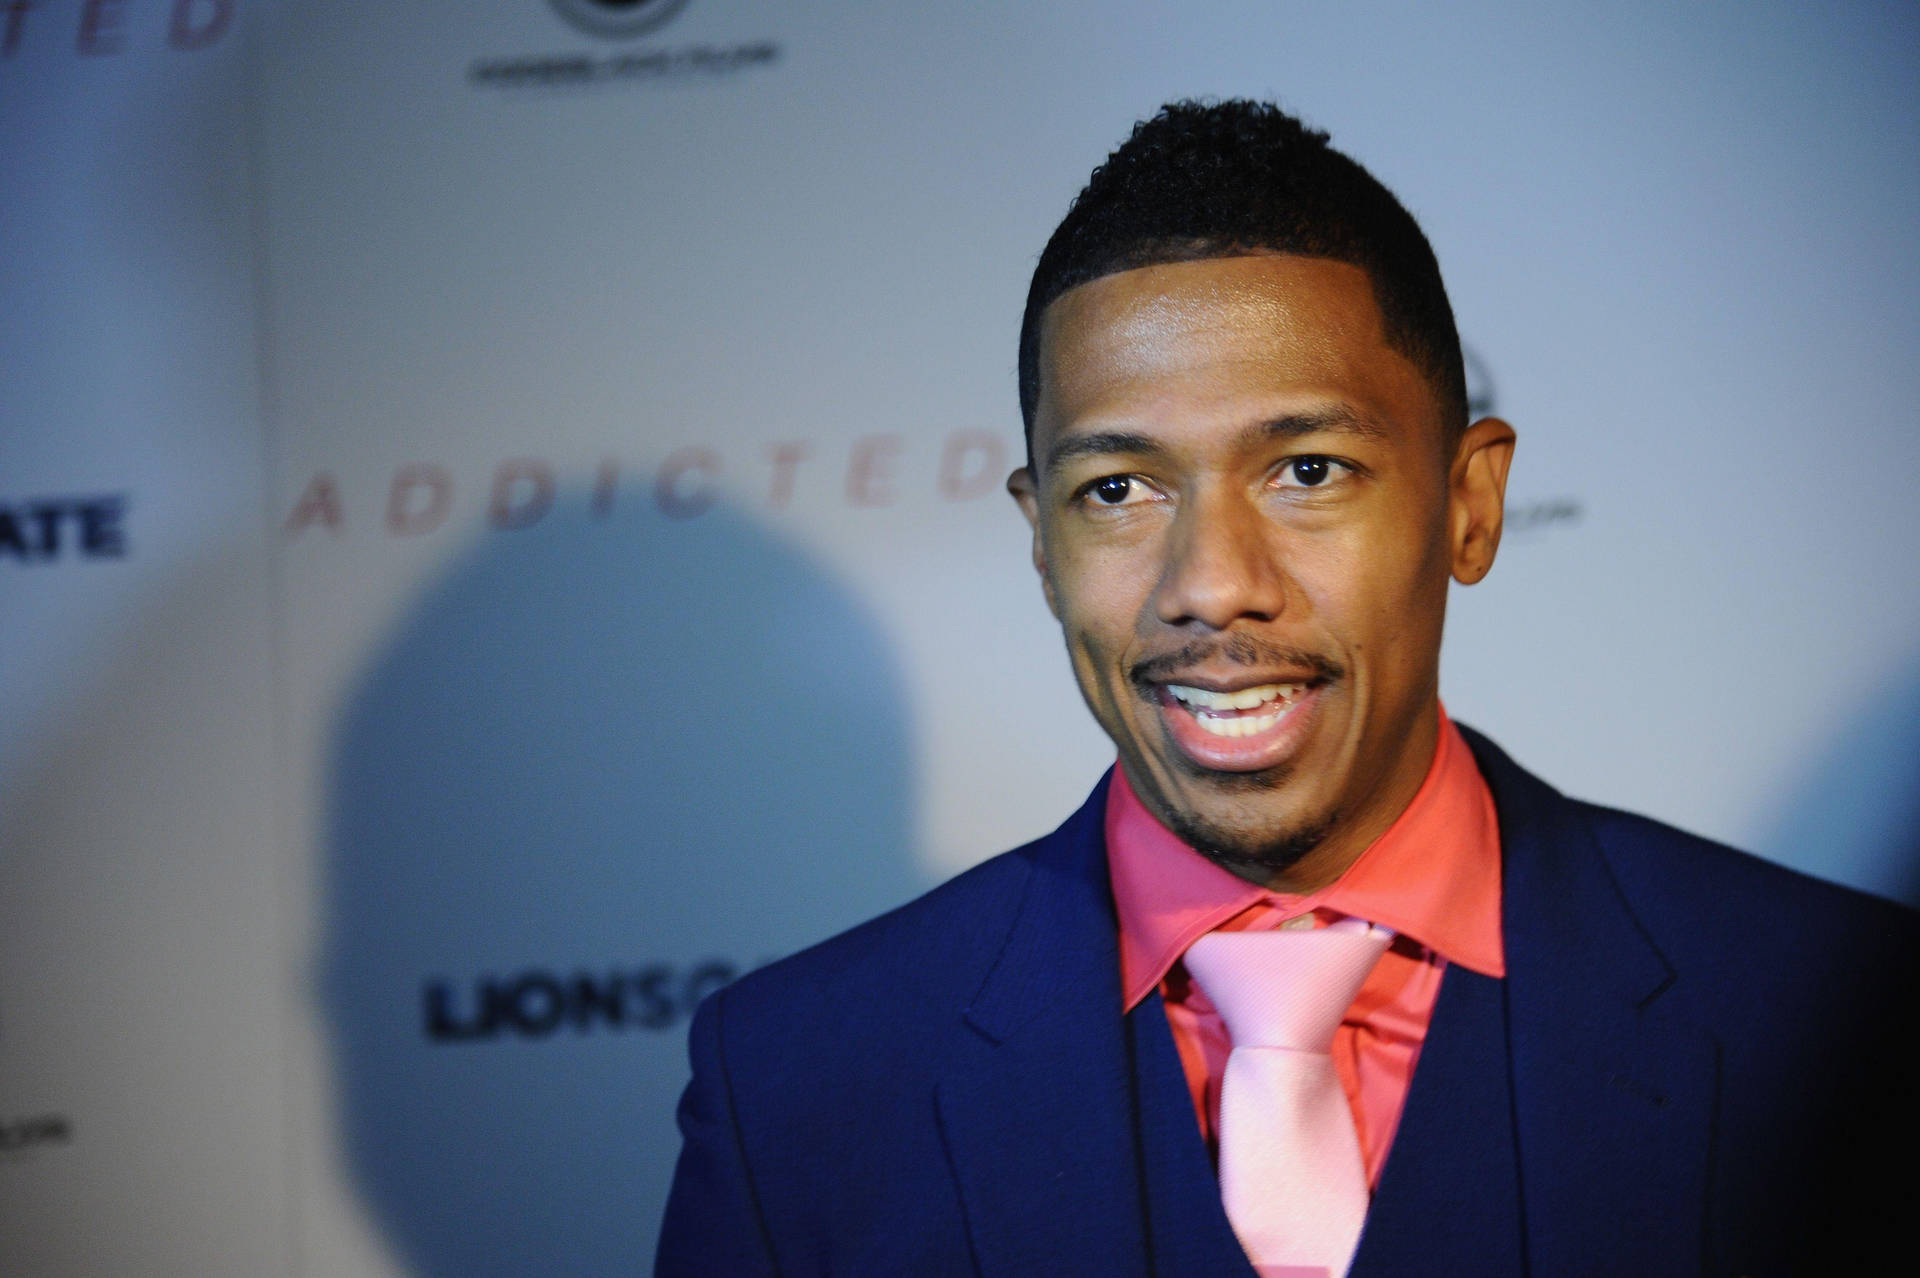 Nick Cannon Talking On Red Carpet Wallpaper